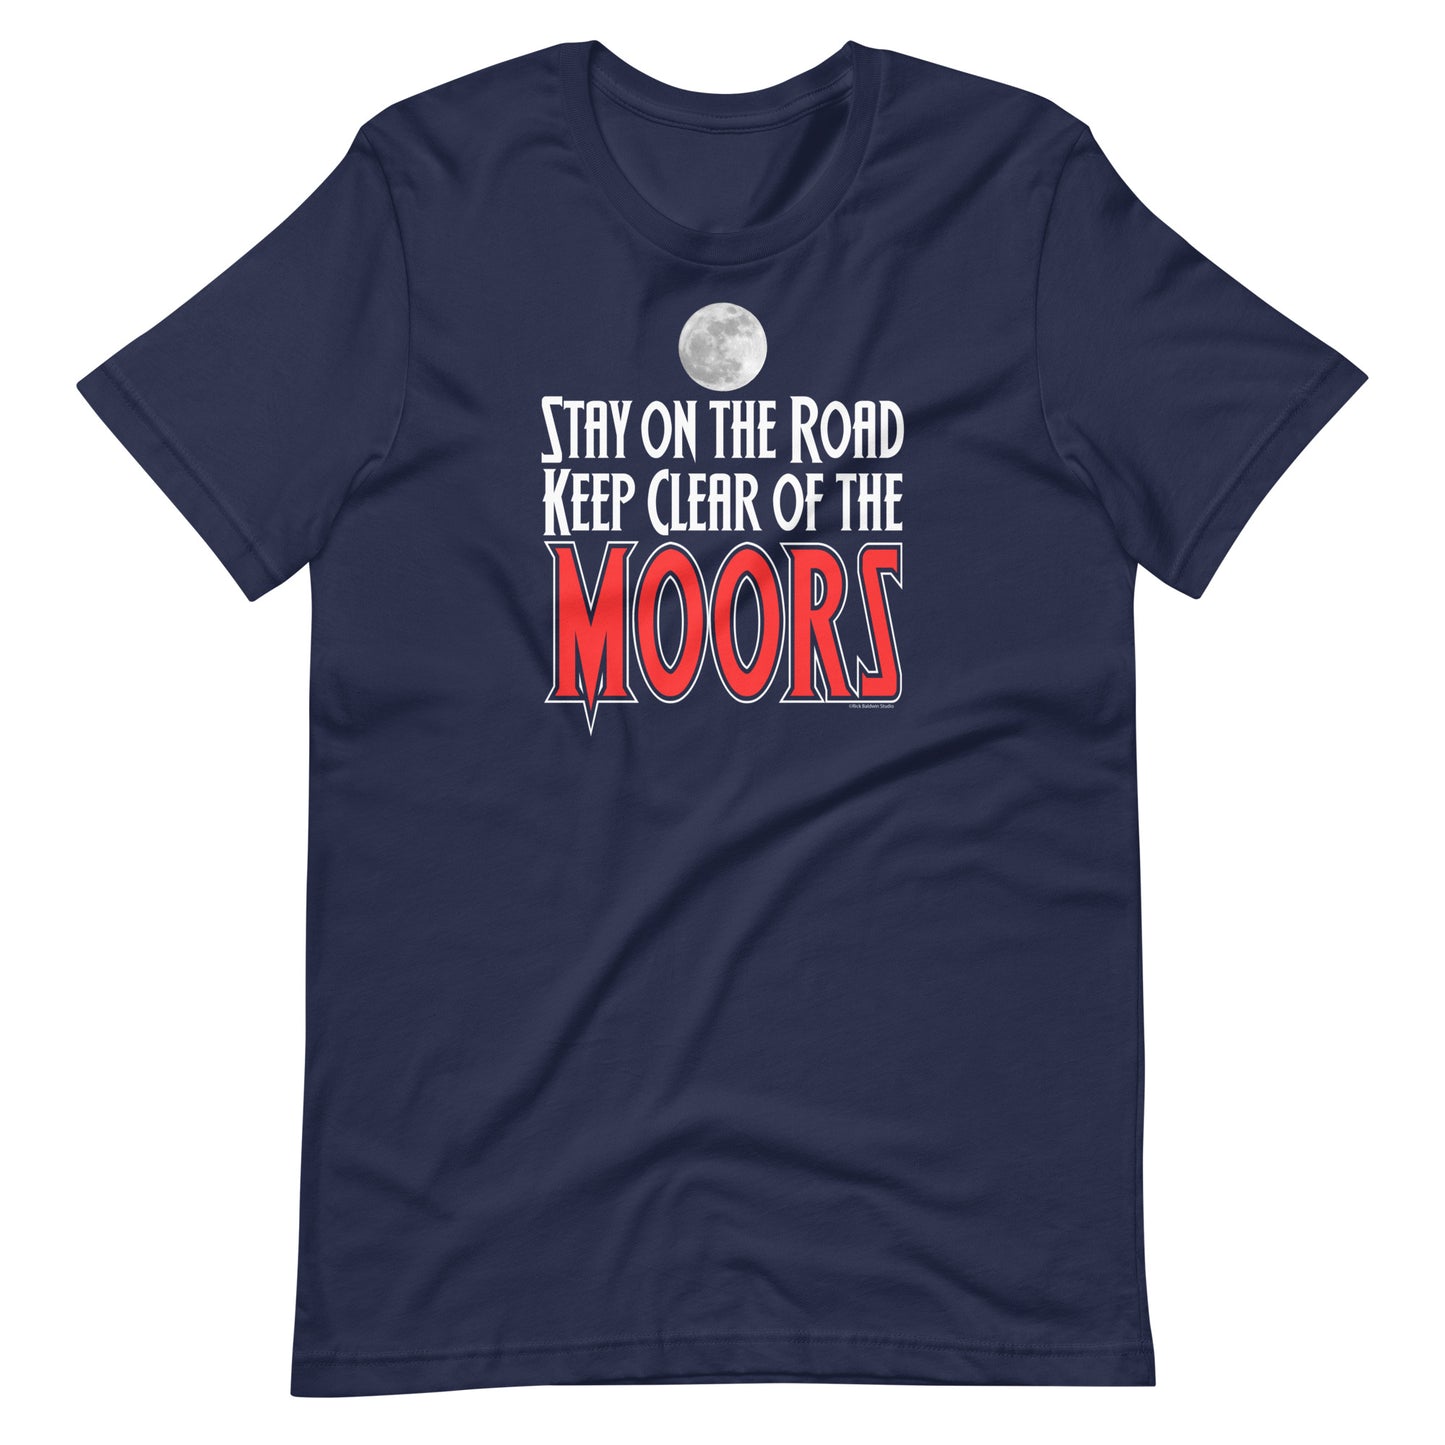 Keep Clear of the Moors Unisex T-shirt by RICK BALDWIN